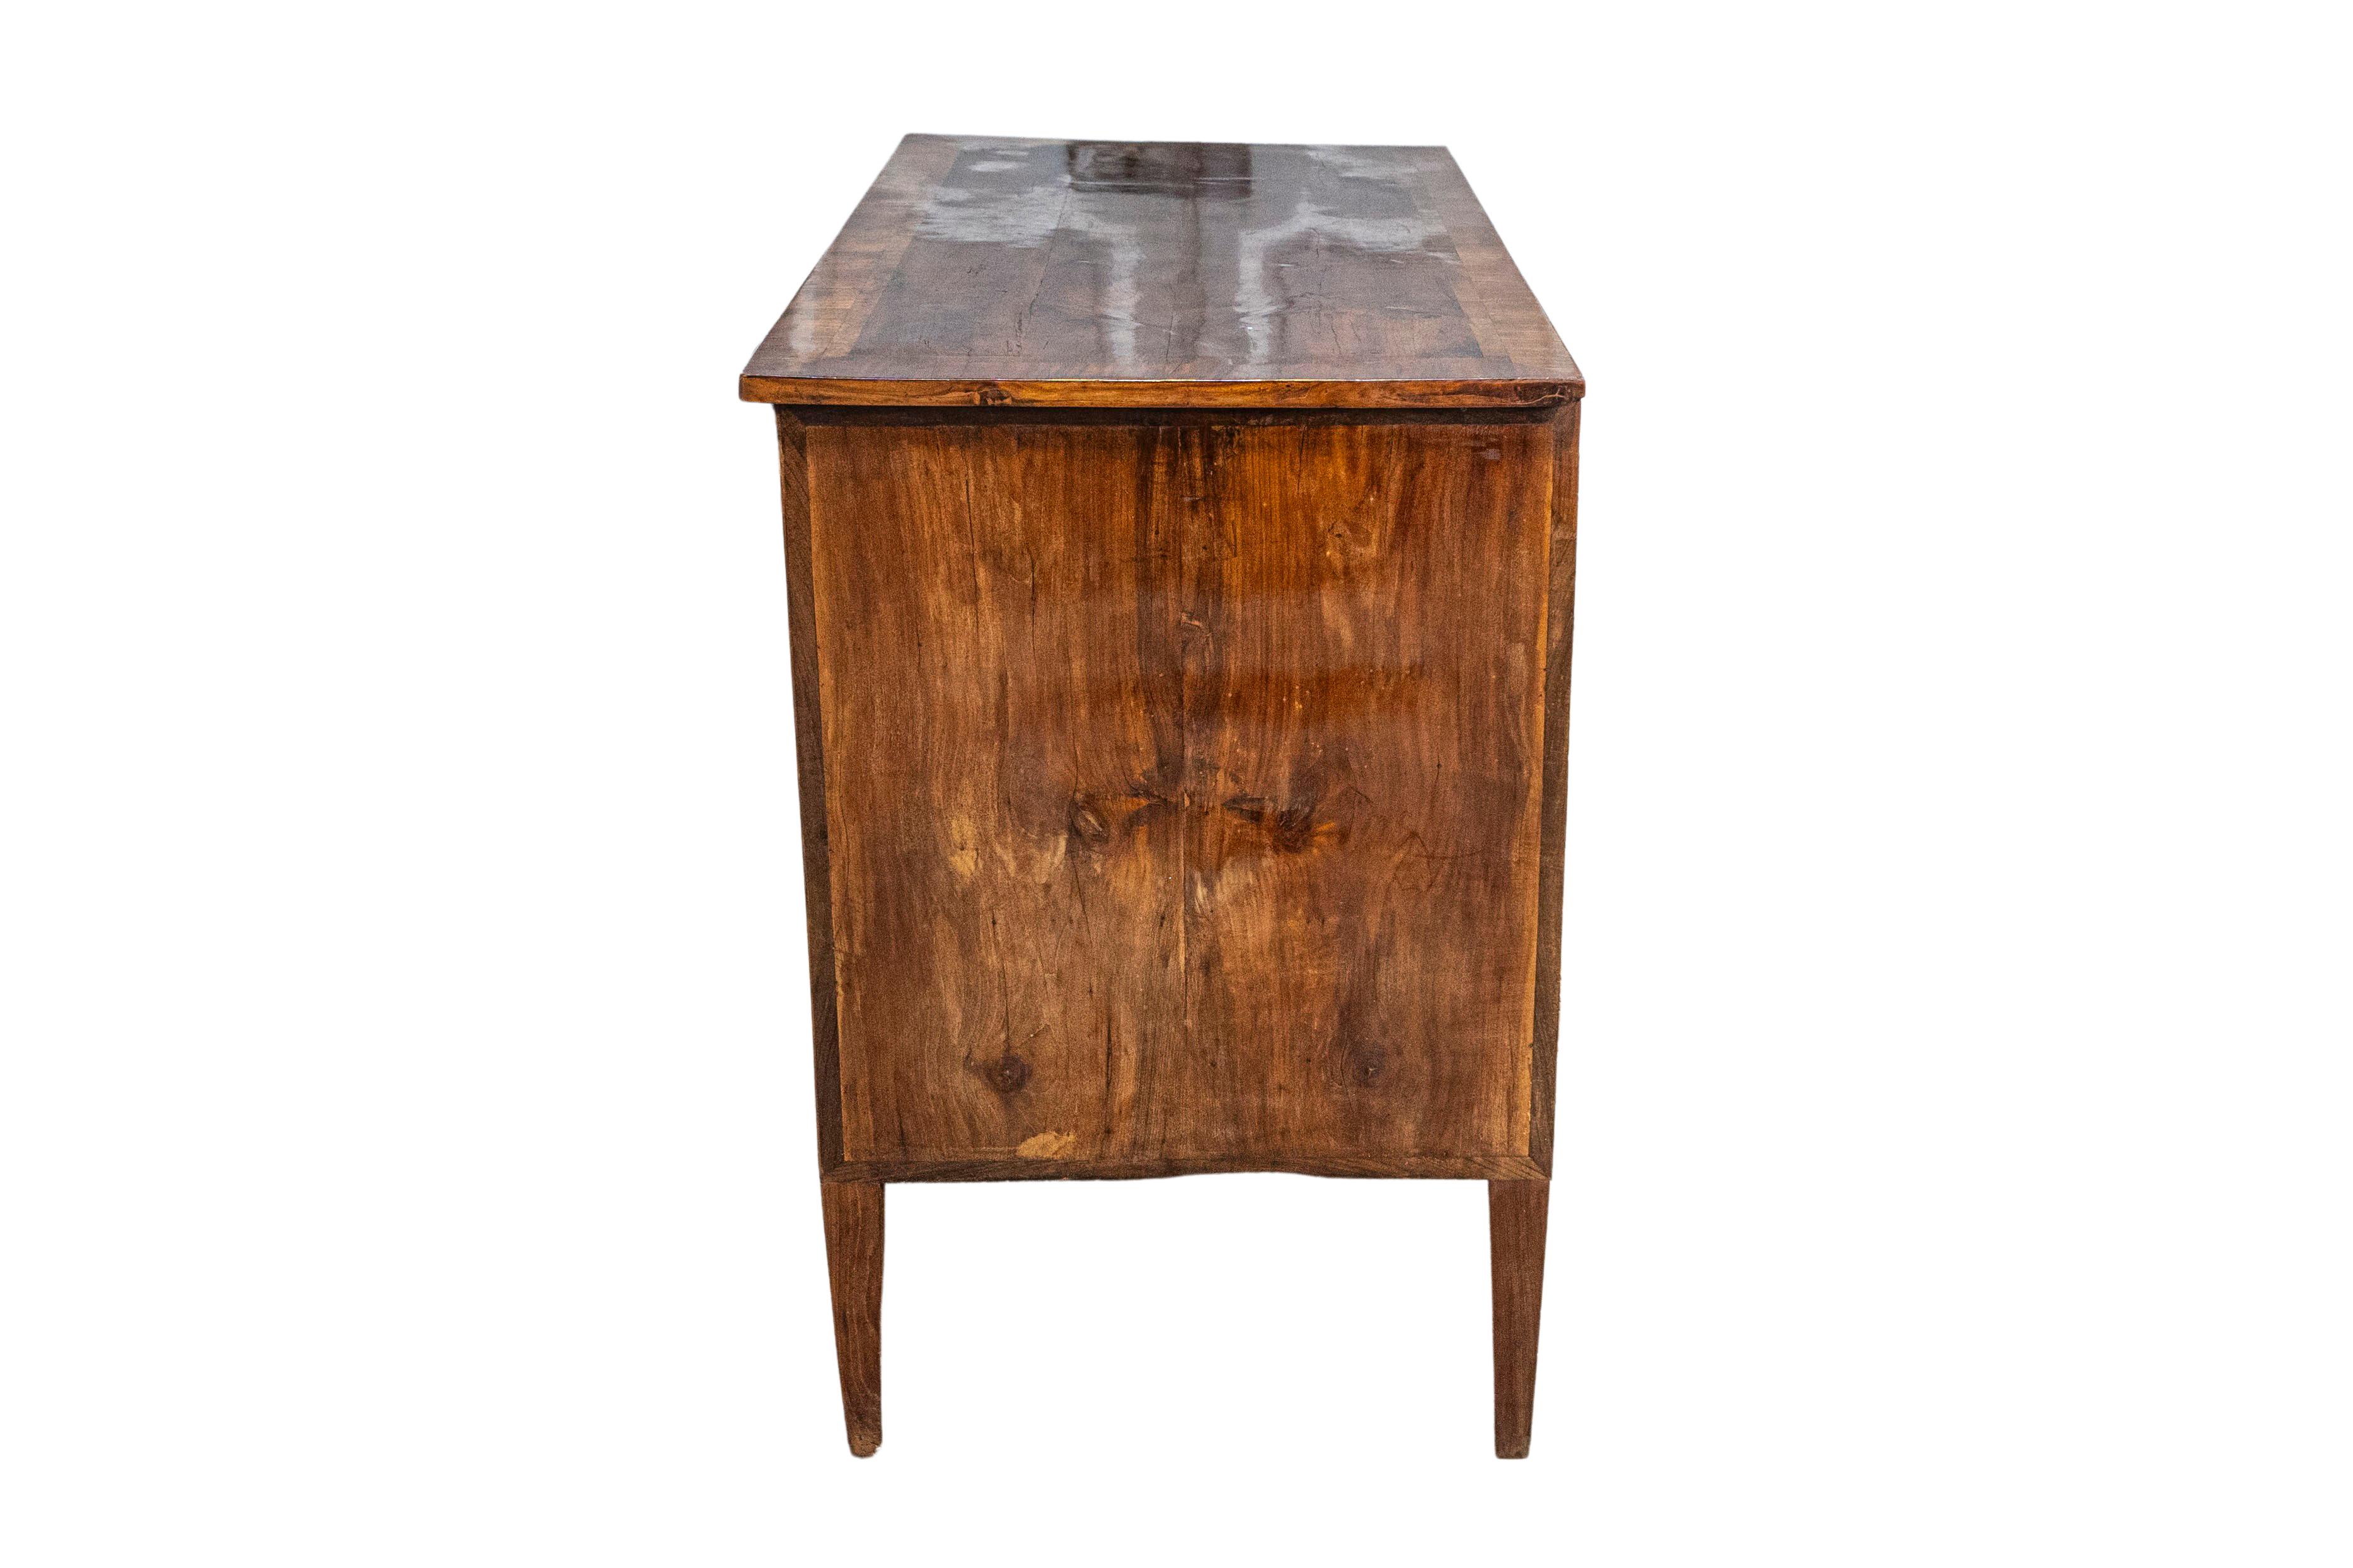 Veneer Italian Neoclassical Period 18th Century Walnut Commode with Four Drawers For Sale